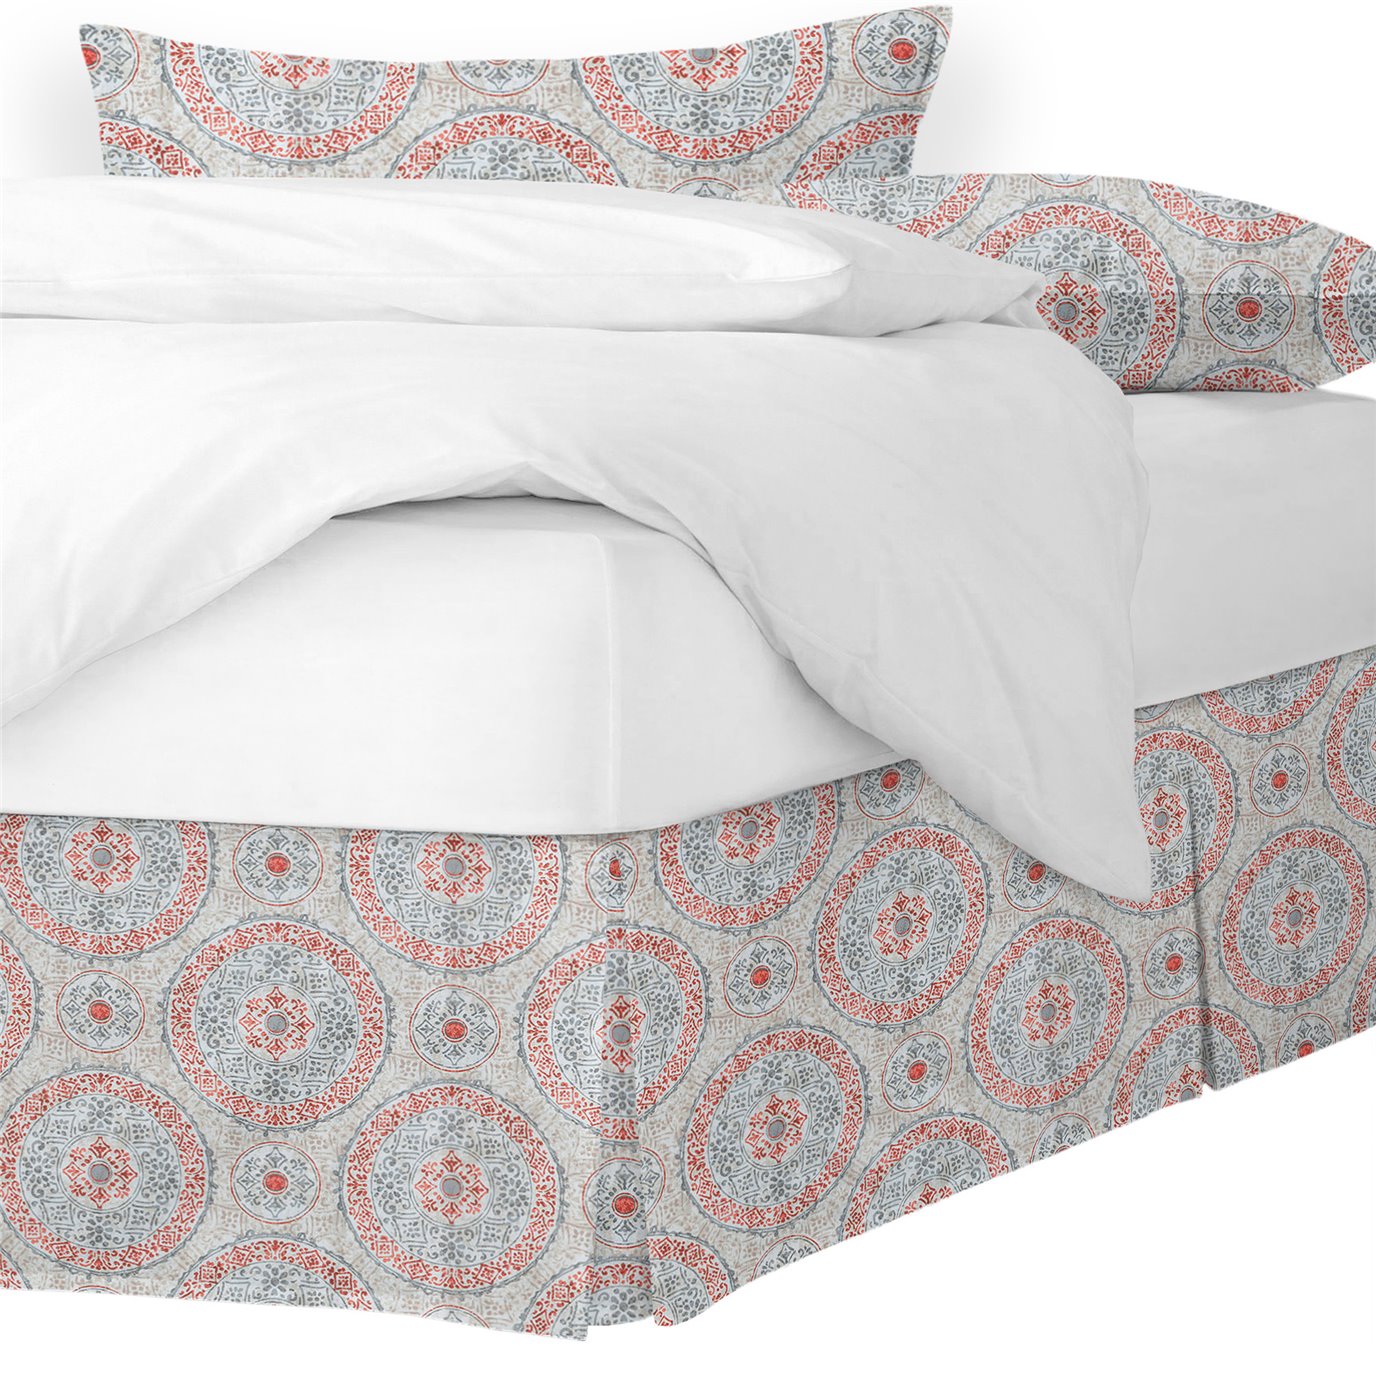 Zayla Coral King Bed Skirt 15" drop